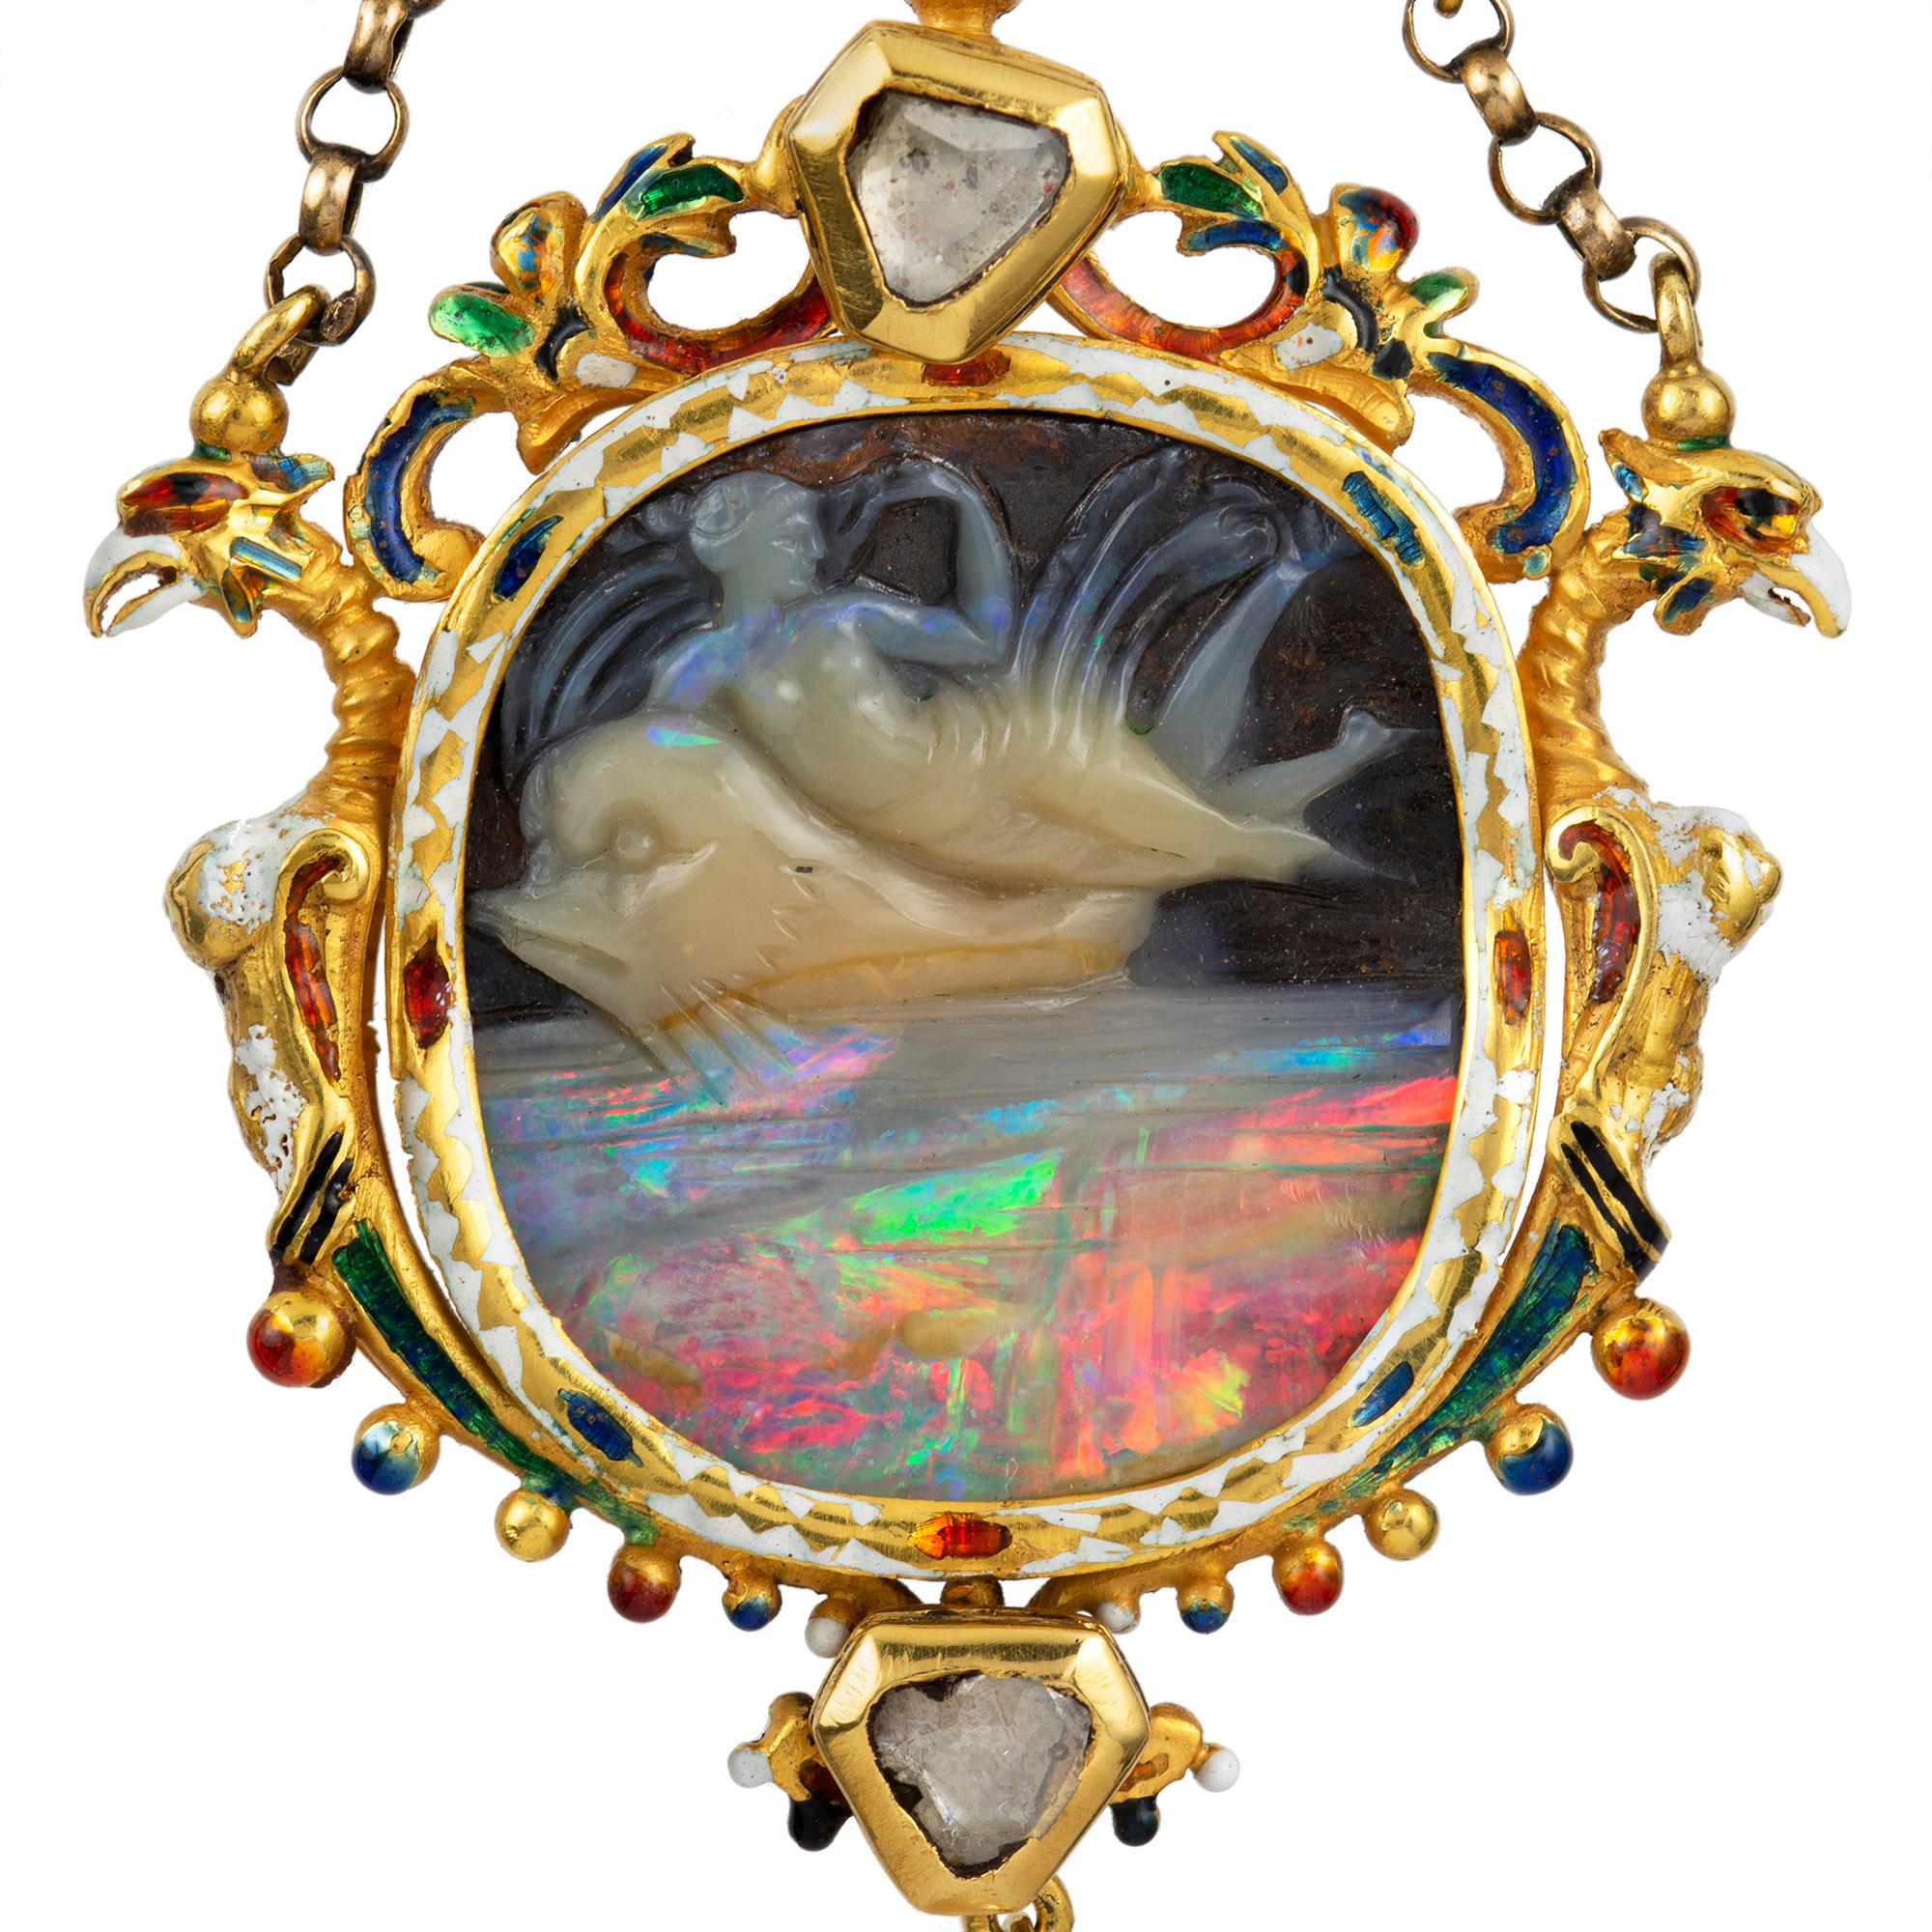 A Renaissance Revival carved opal cameo pendant, the cameo attributed to Wilhelm Schmidt depicting Arion riding a dolphin, to elaborate surround of renaissance style incorporating scrolls and two griffins, bearing polychrome enamel decorations and